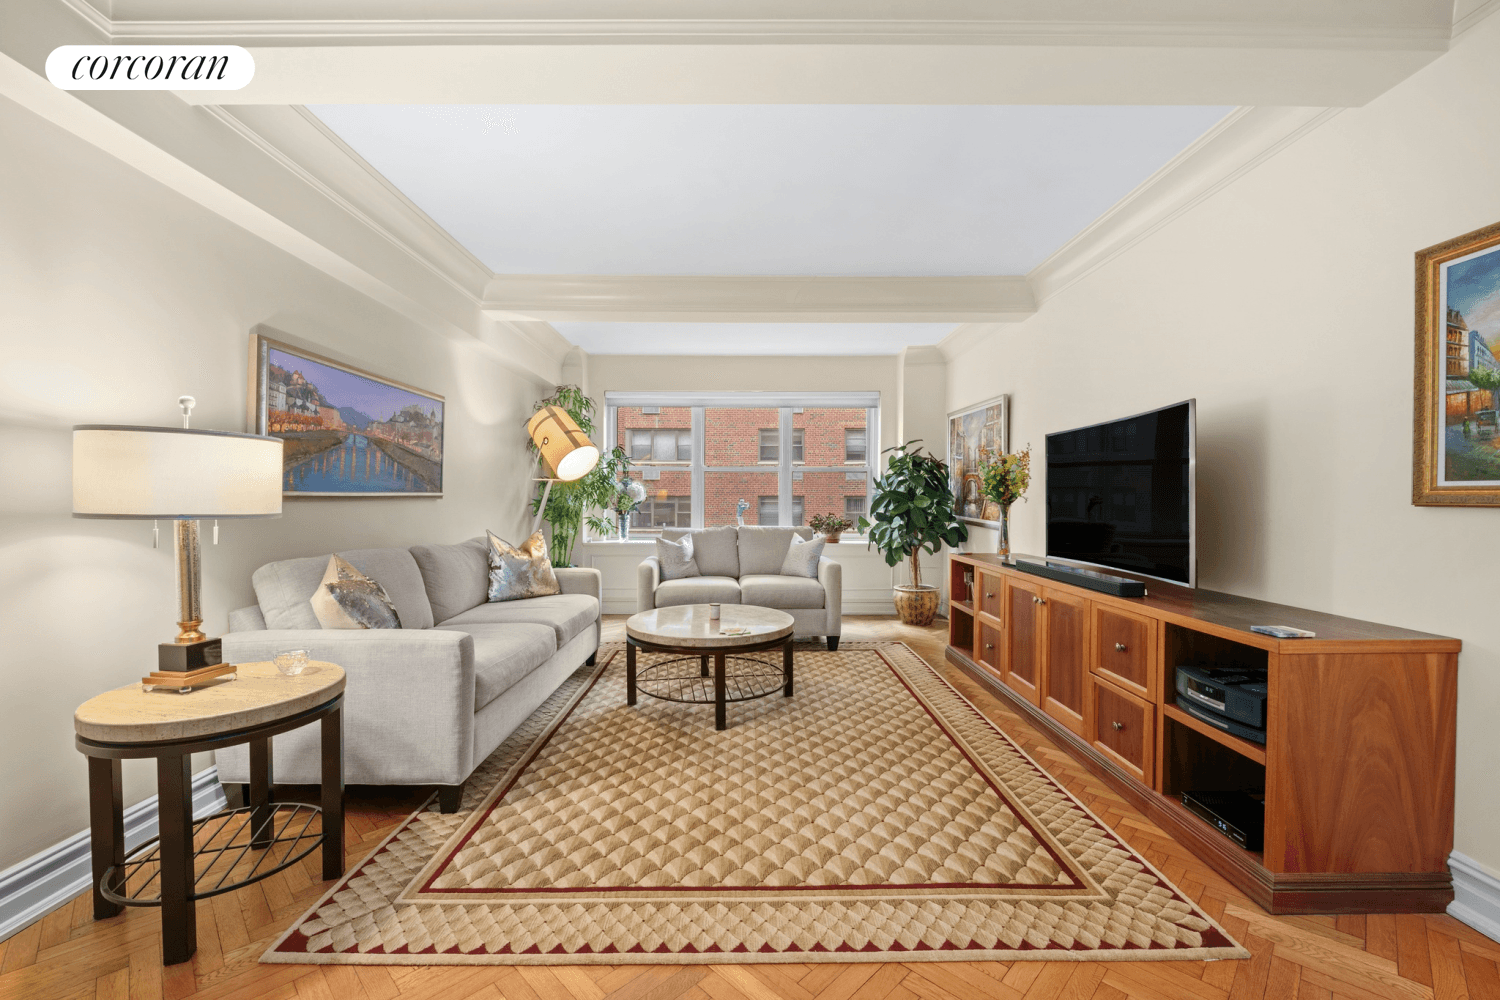 Welcome to this exquisite SOUTH and EAST facing classic Upper East Side condo, now available on the market.